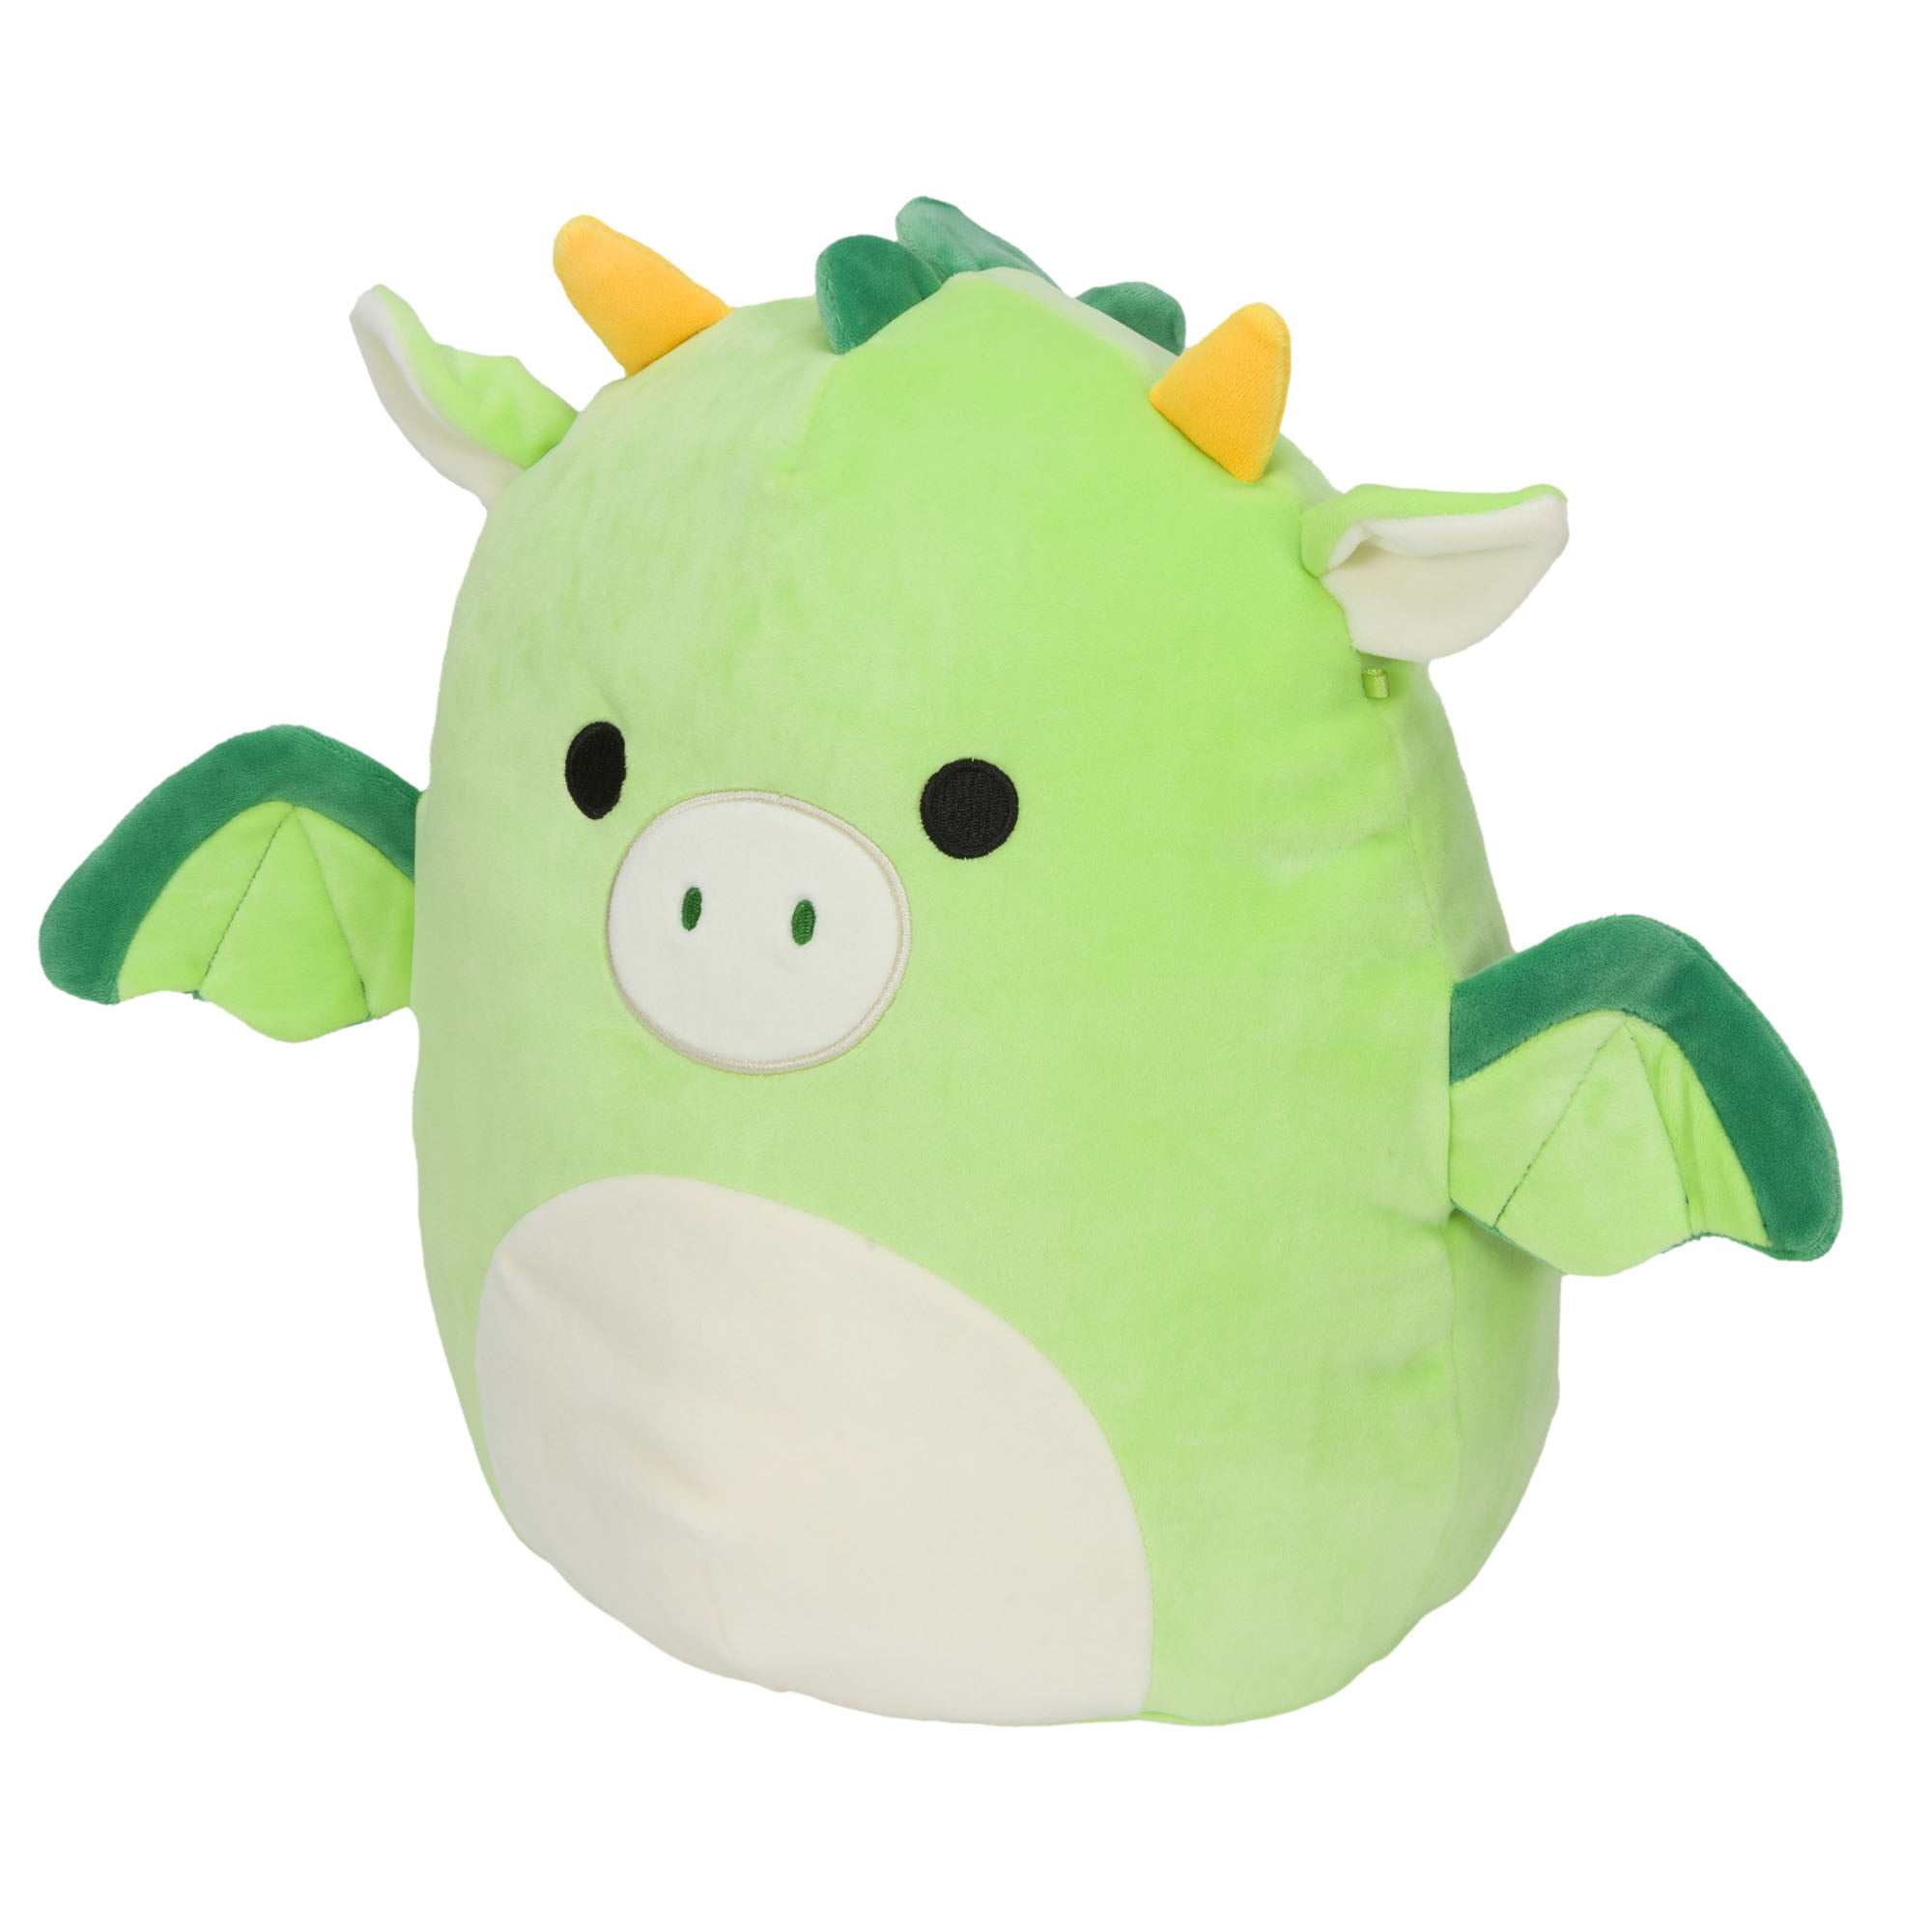 7951 Cuddly soft 8" Large Green and Yellow Plush Age 3+ - Dragon 